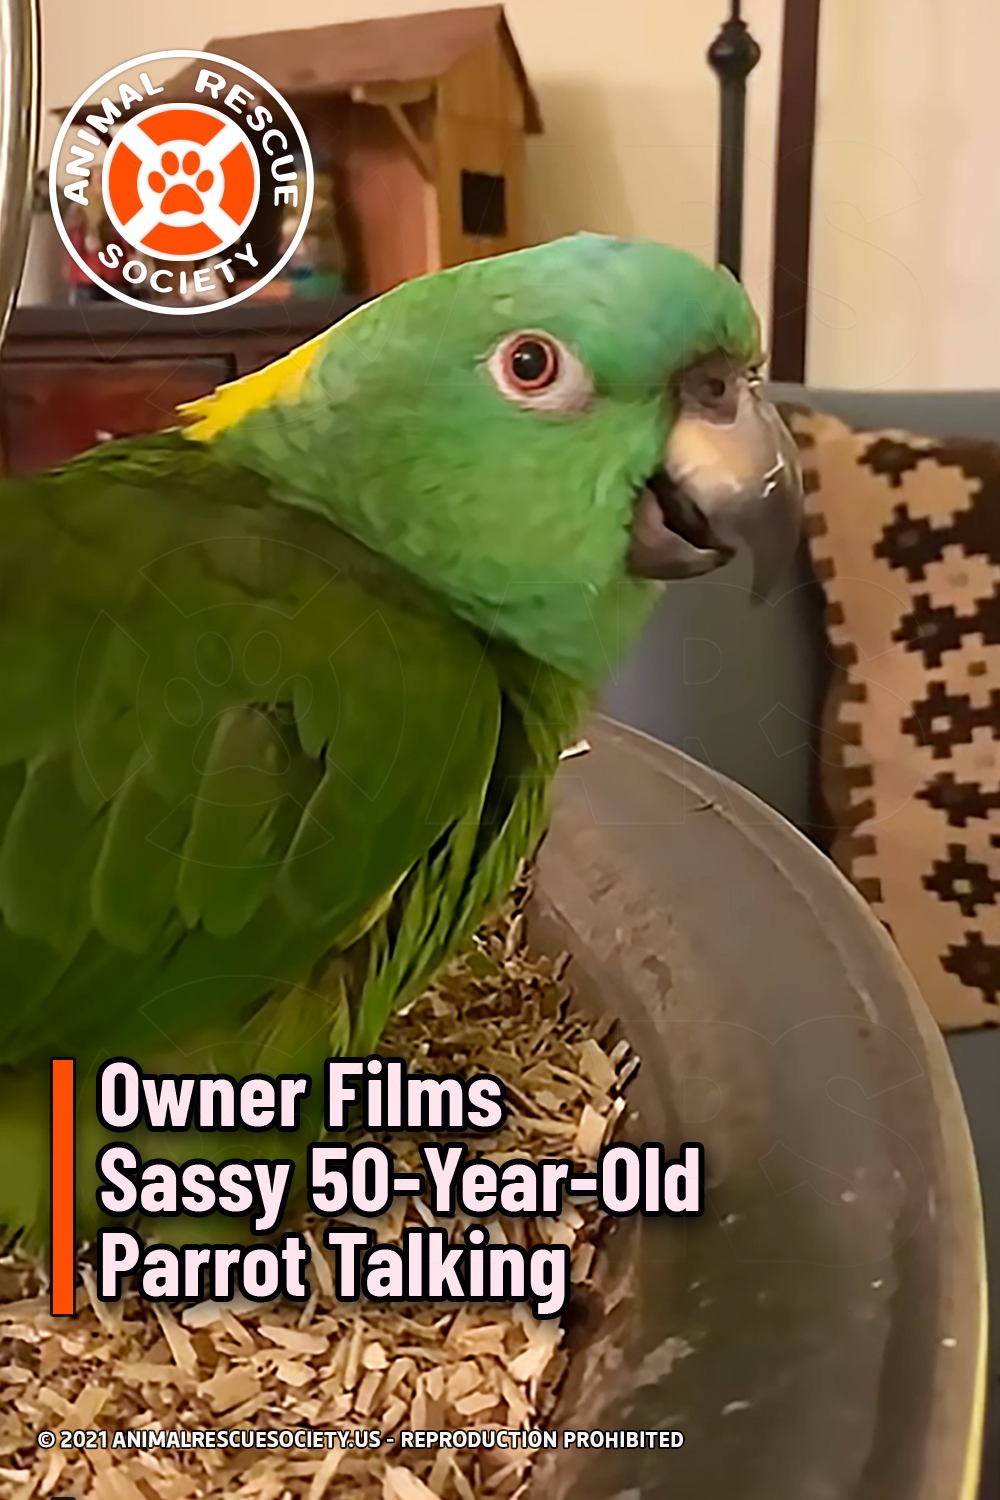 Owner Films Sassy 50-Year-Old Parrot Talking